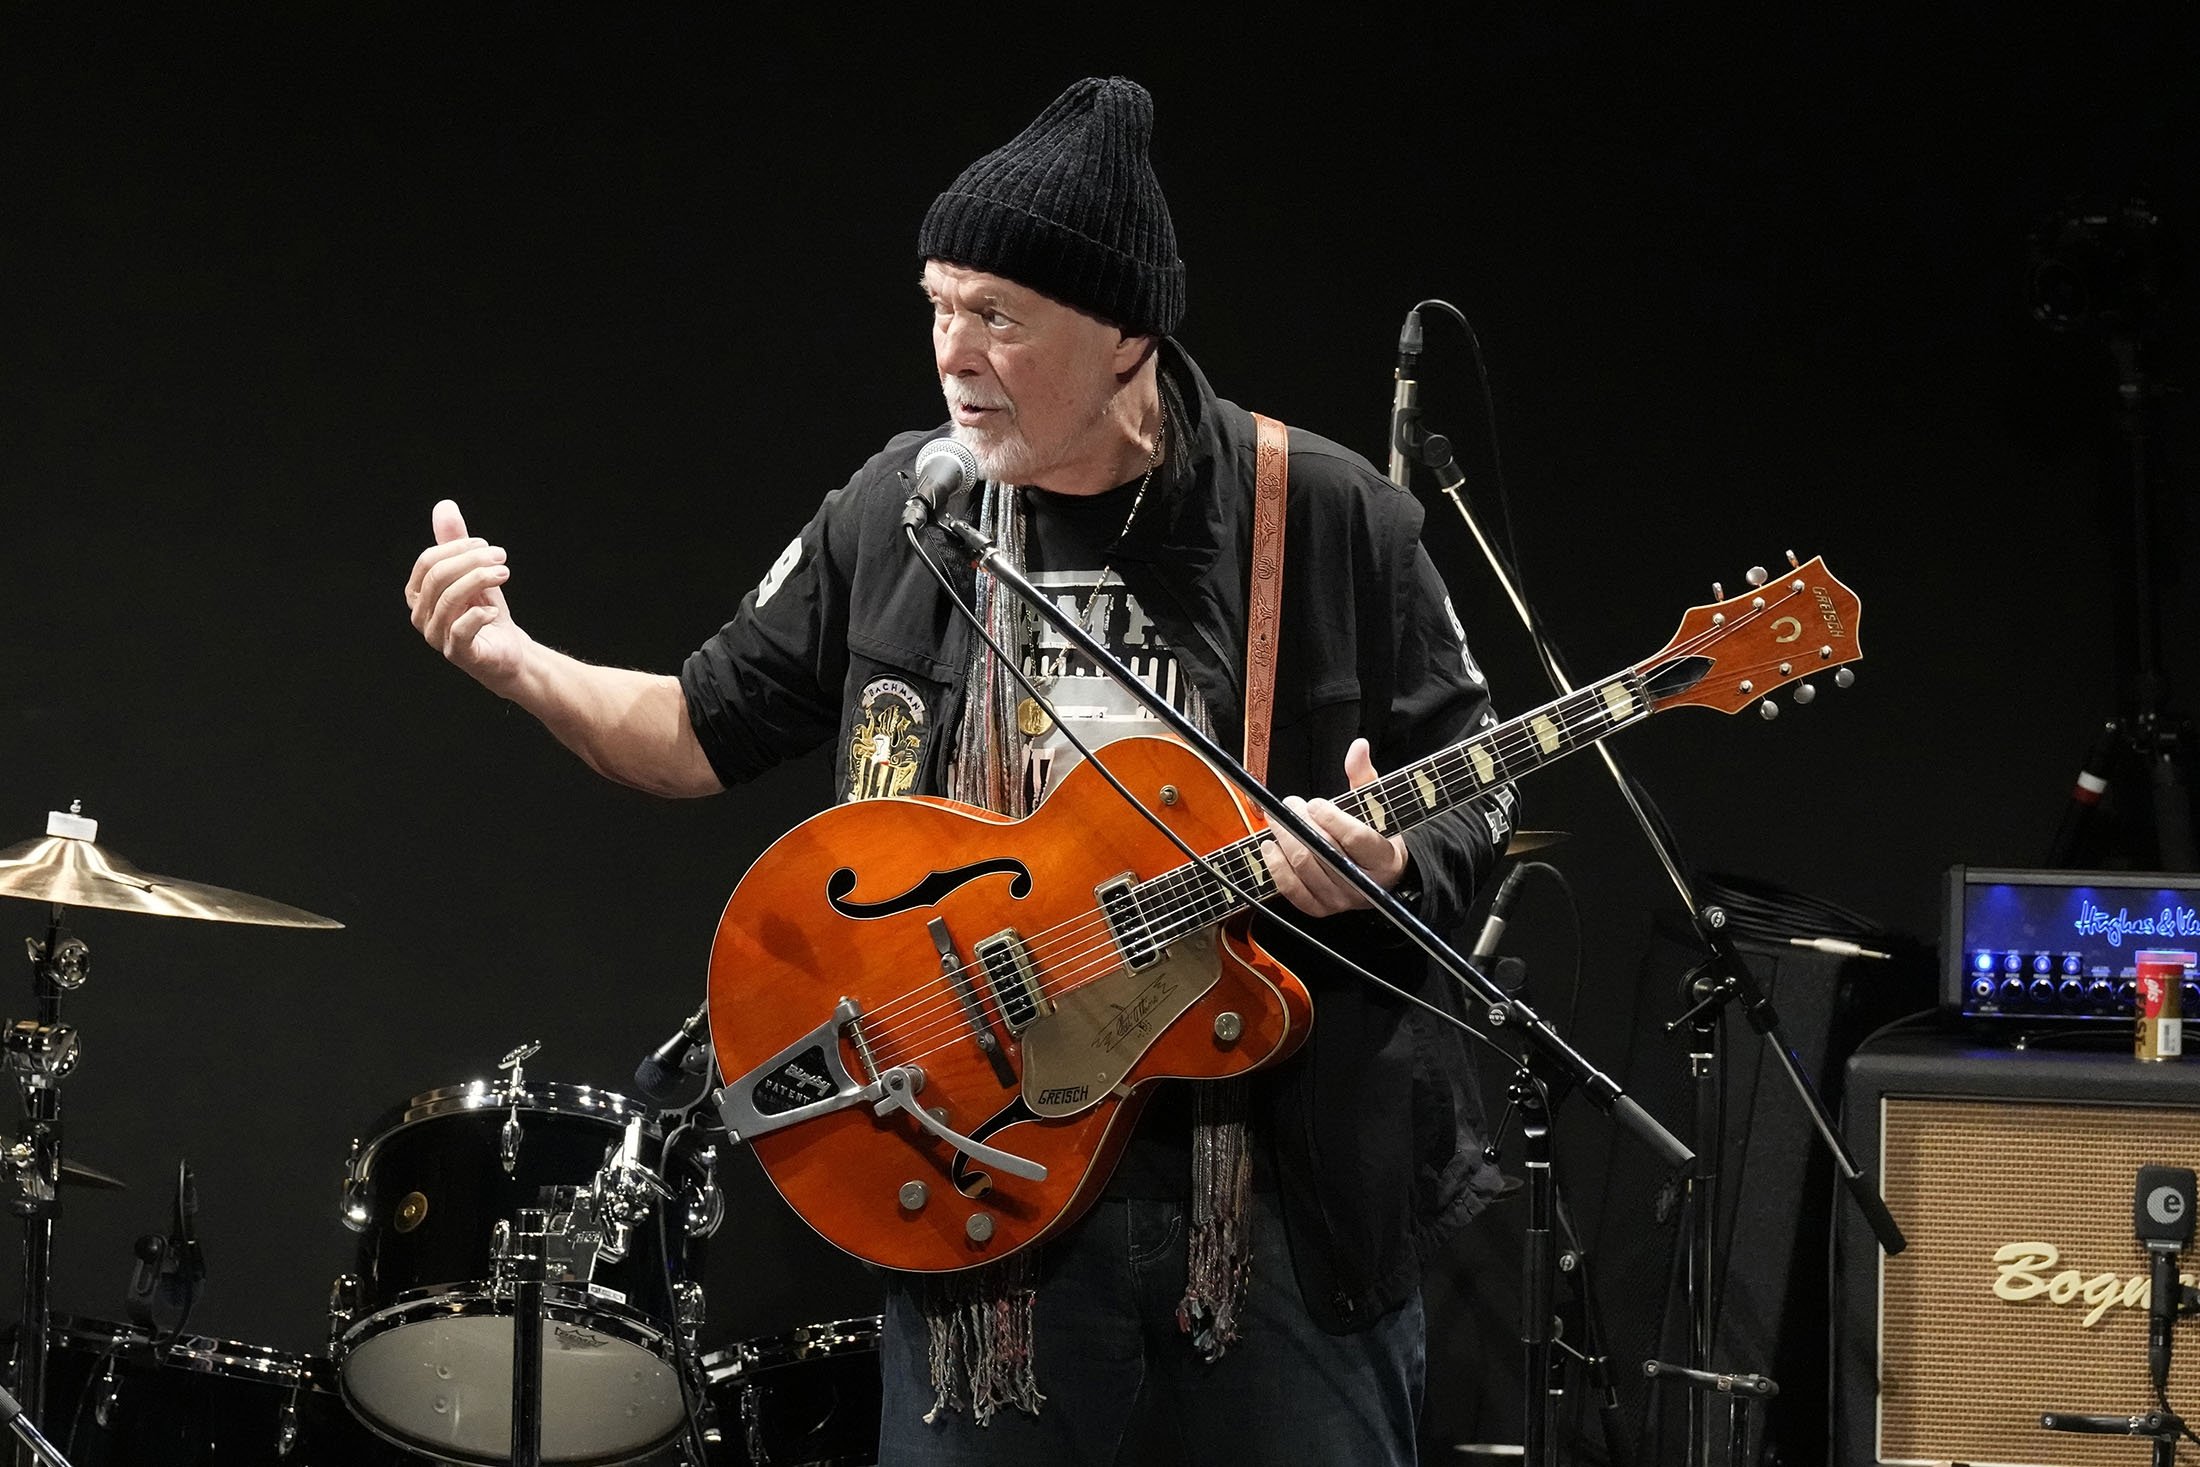 Canadian rock legend Randy Bachman performs as he plays with his reunited Gretsch guitar during the Lost and Found Guitar Exchange Ceremony, at Canadian Embassy in Tokyo, Japan, July 1, 2022. (AP Photo)